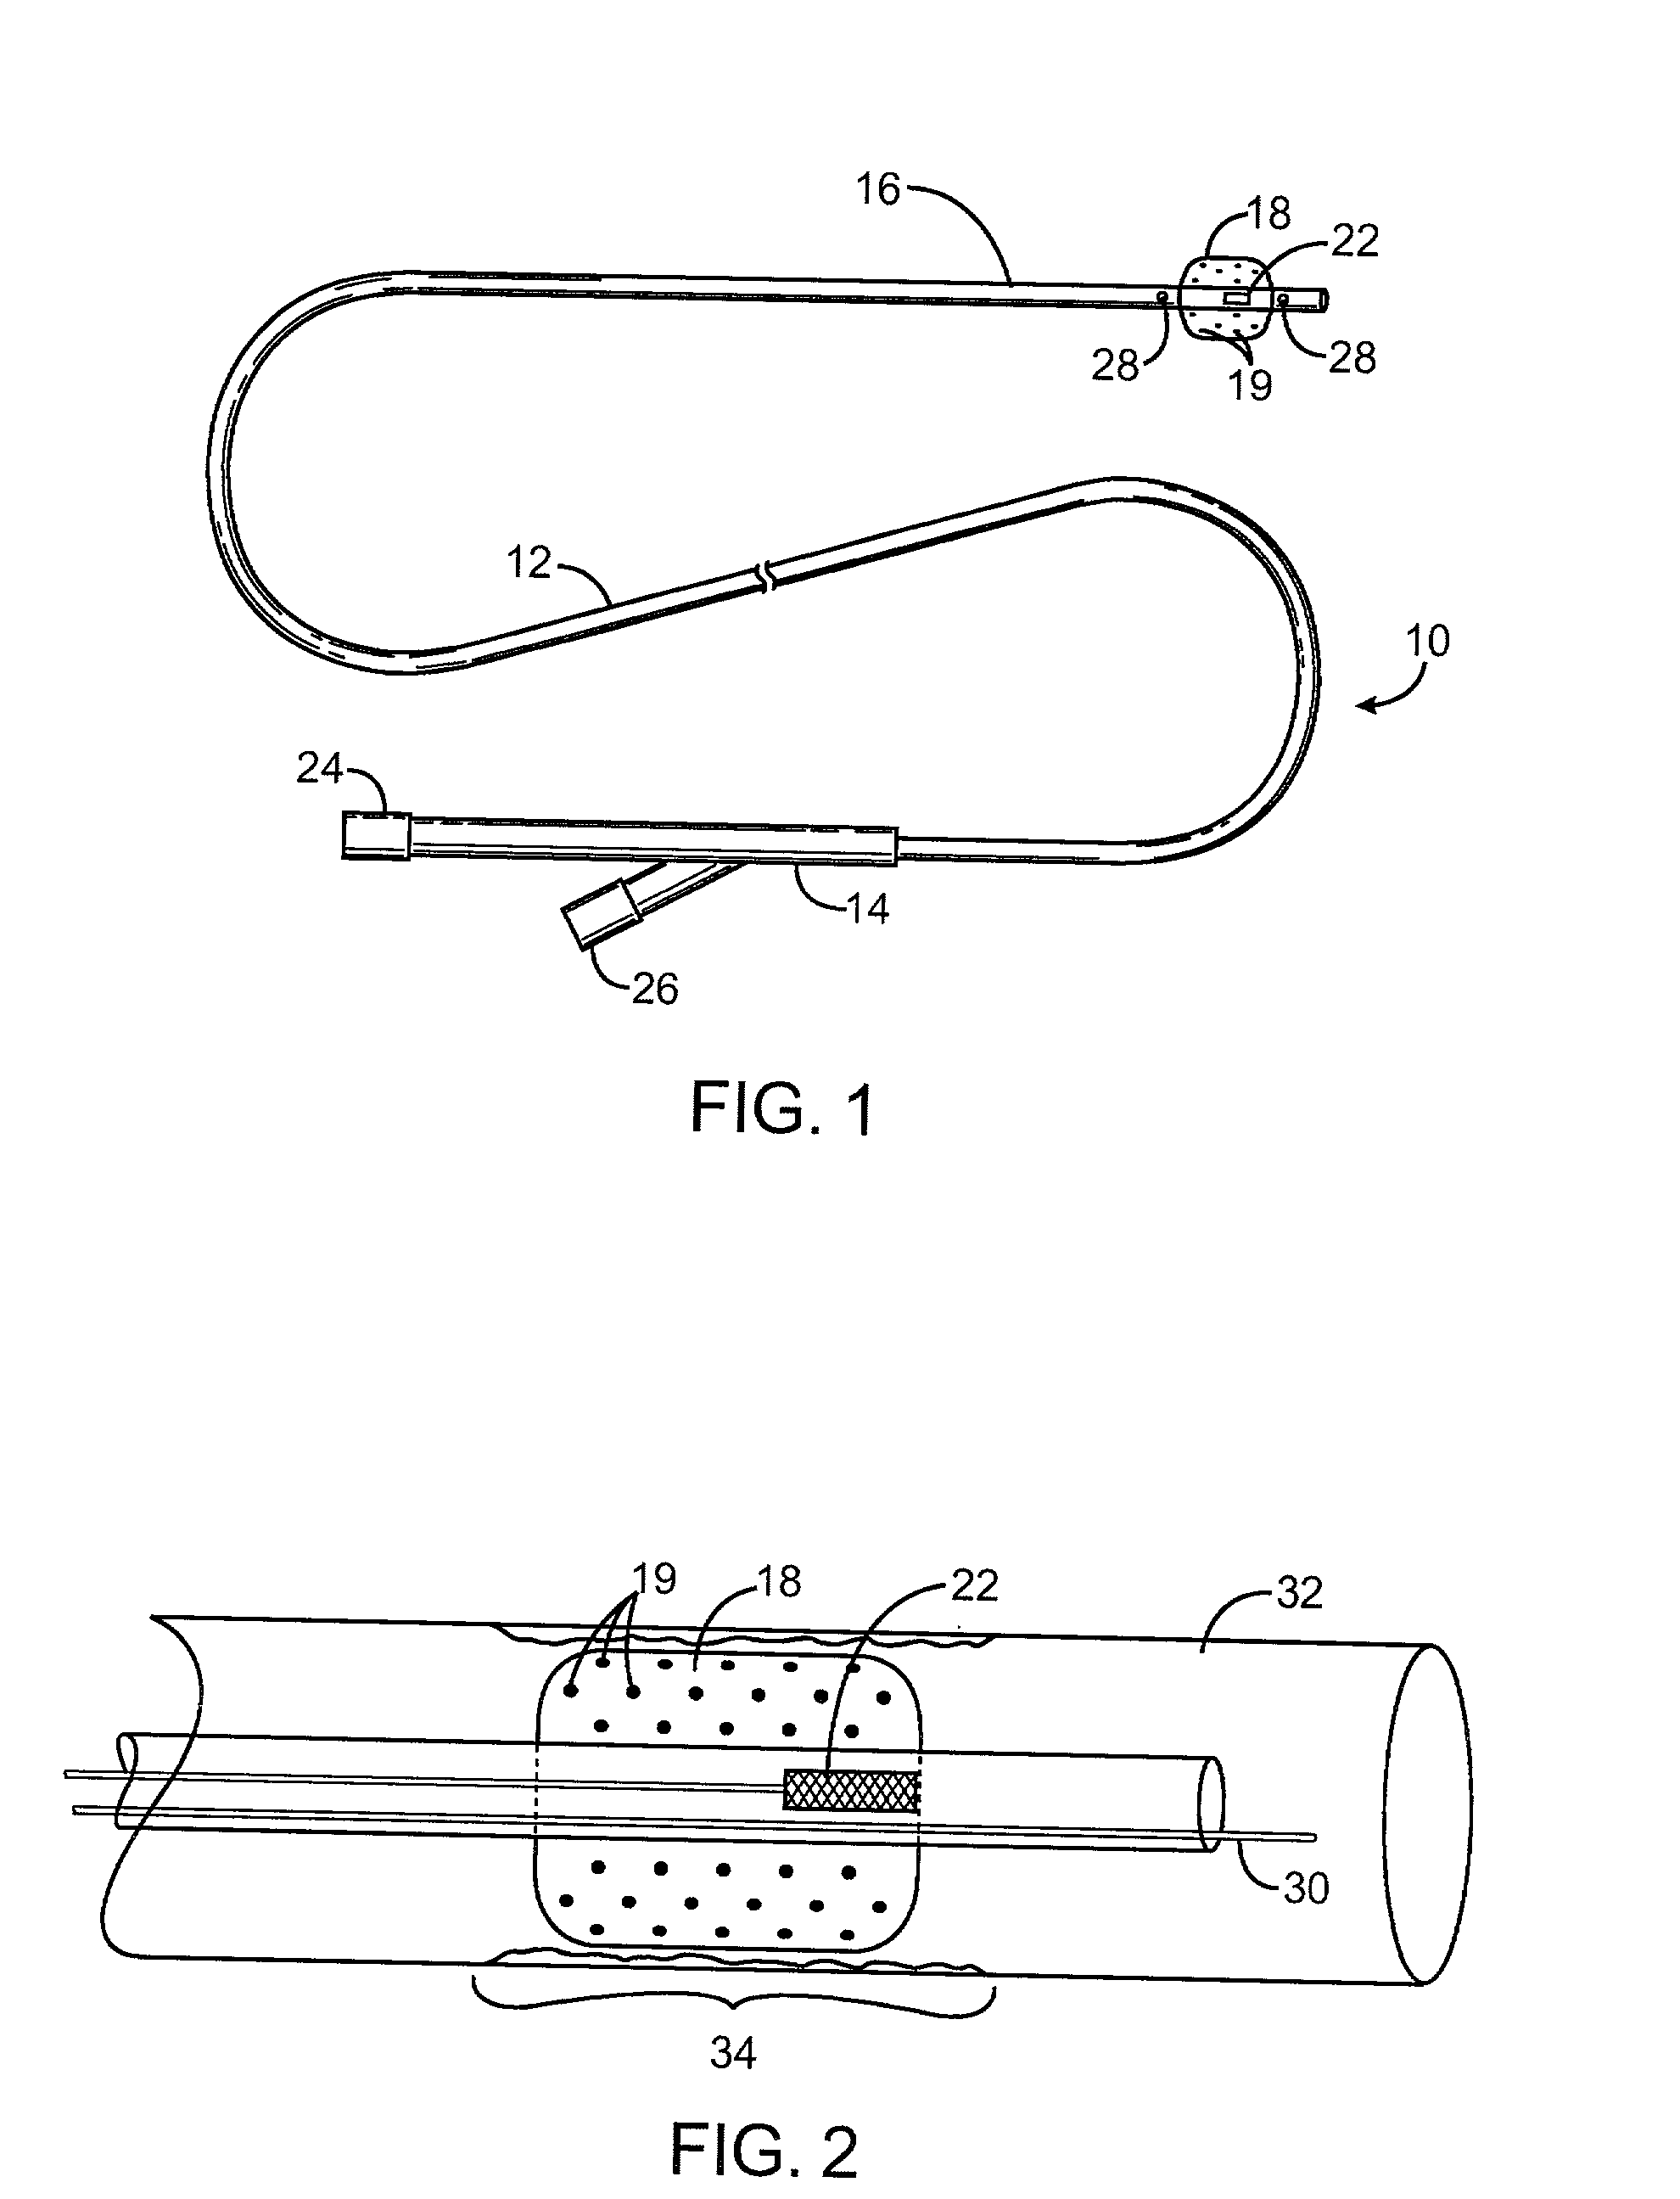 Combination ionizing radiation and radiosensitizer delivery devices and methods for inhibiting hyperplasia